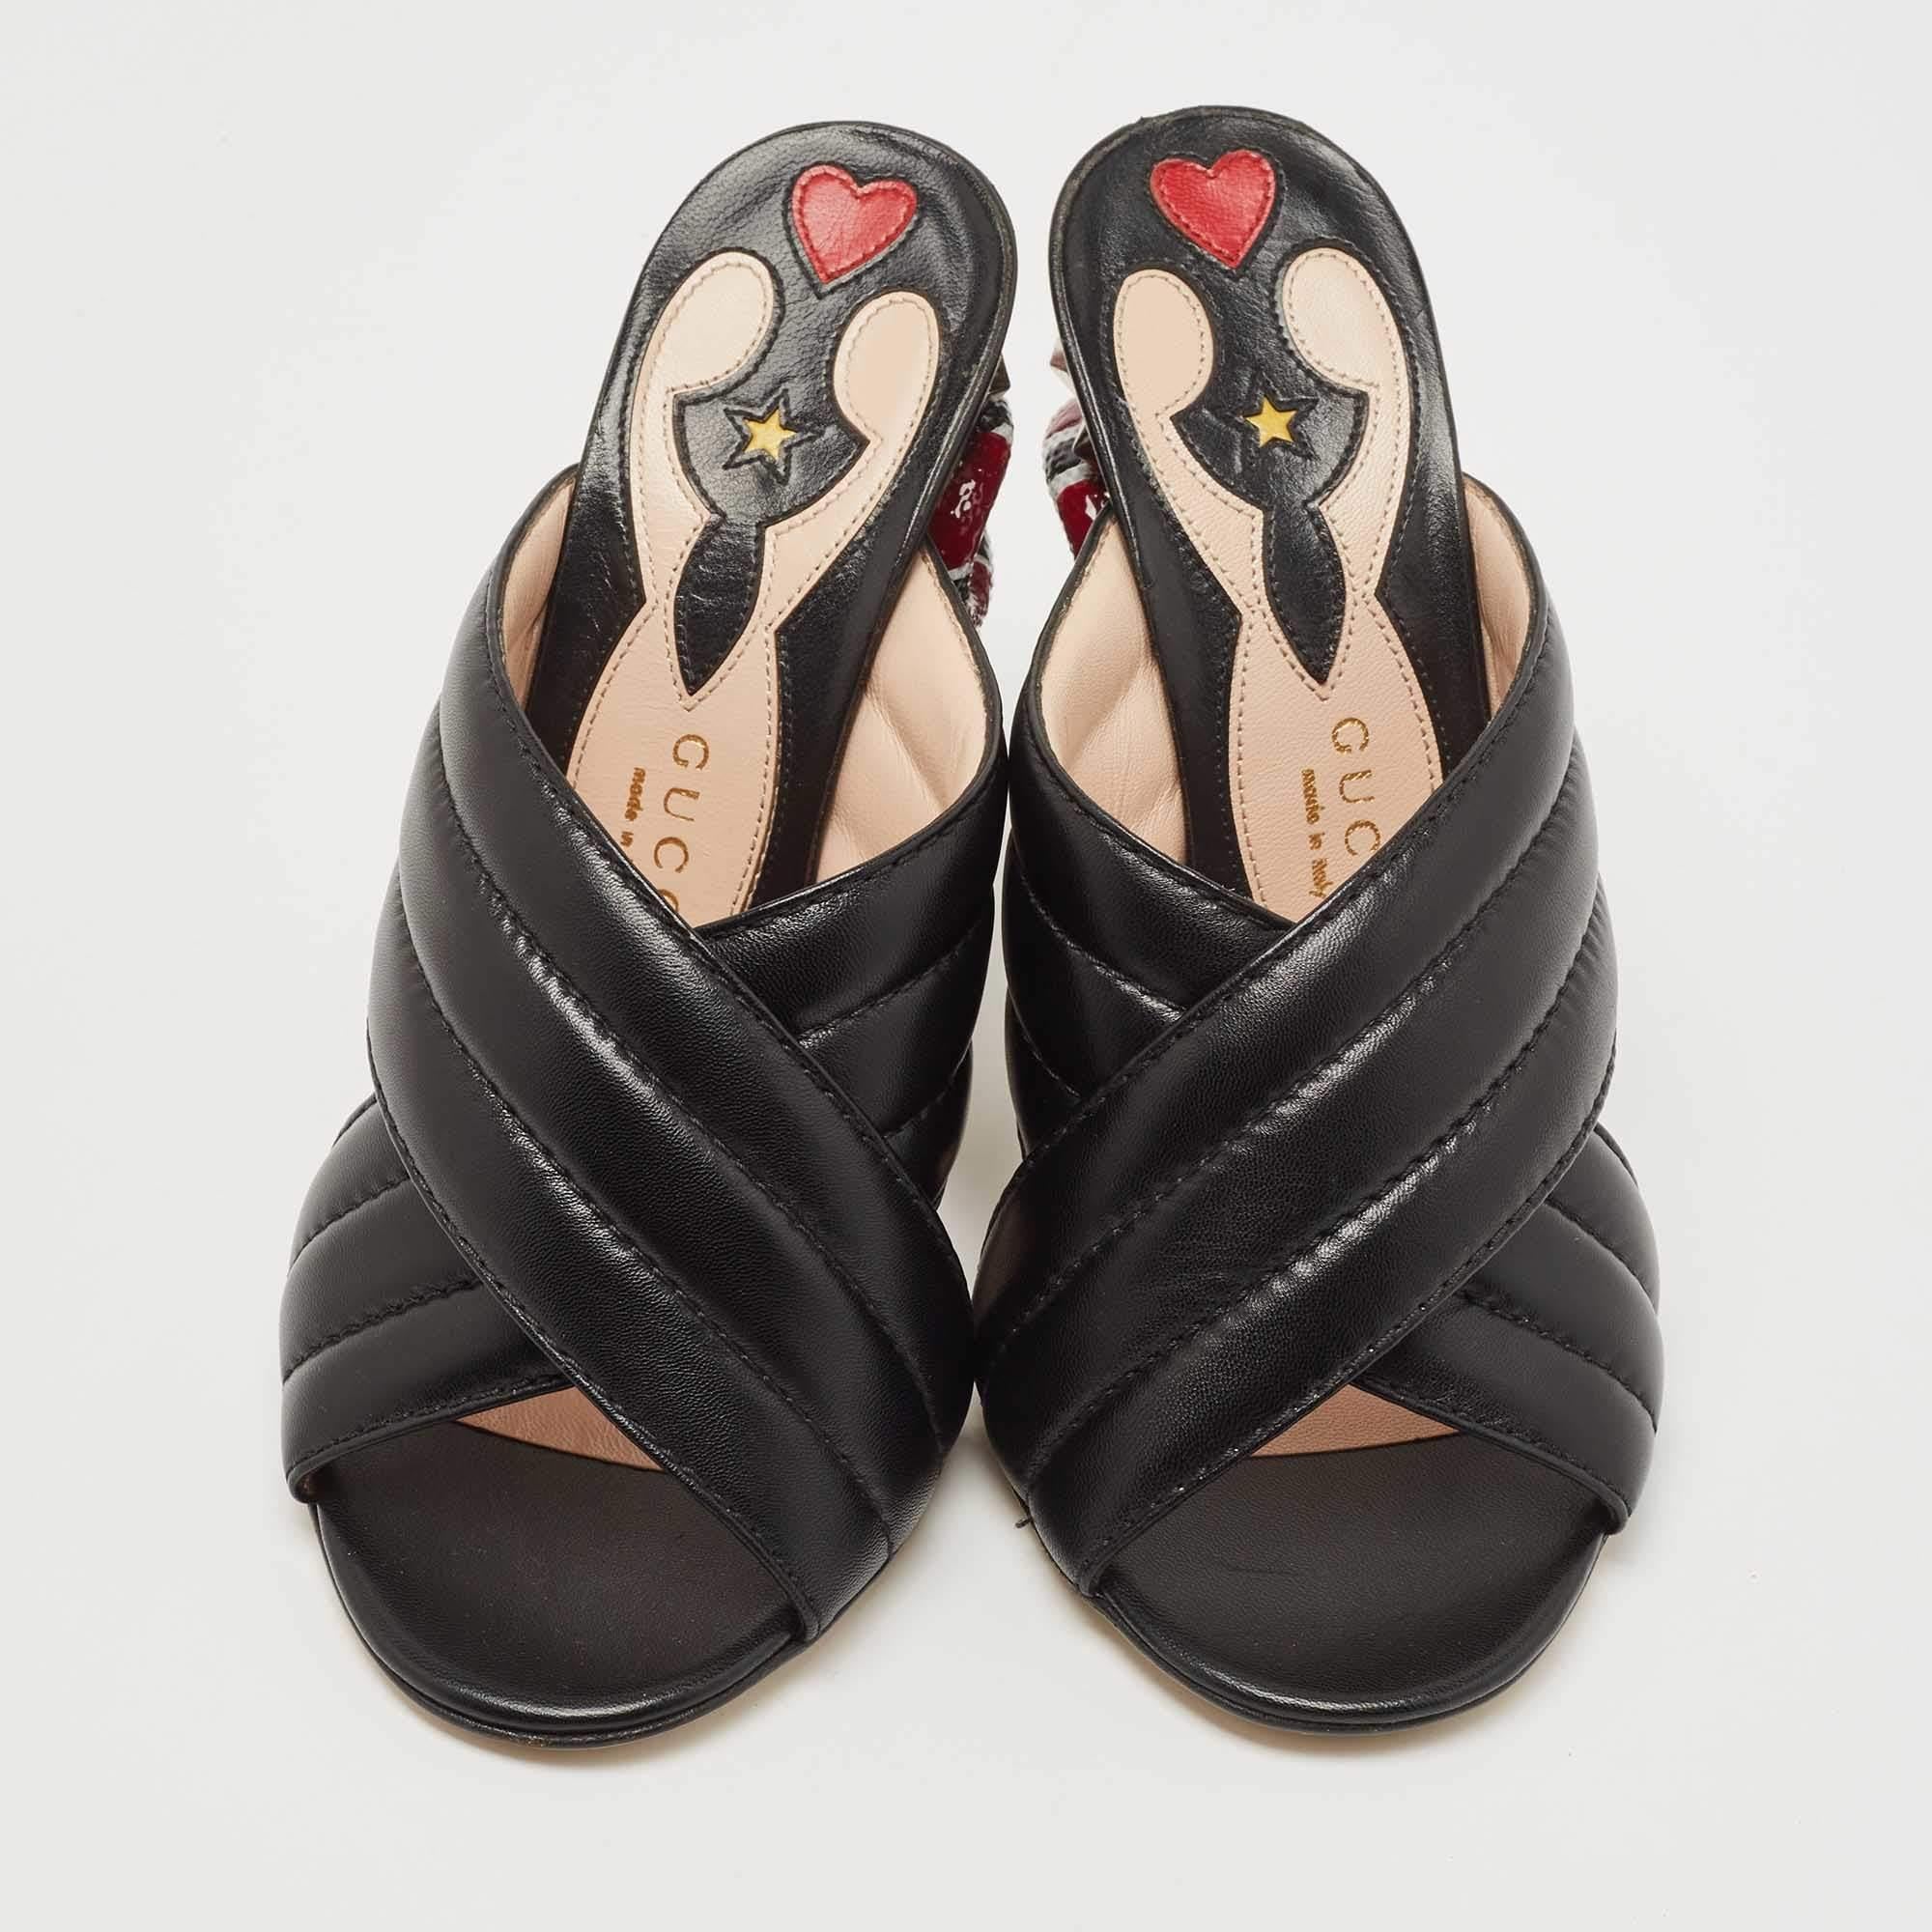 Deliver statement looks with these slides from Gucci! From their shape and detailing to their overall appeal, they exude sophisticated style. The sandals come crafted from black leather and feature front crisscross straps and embellished block